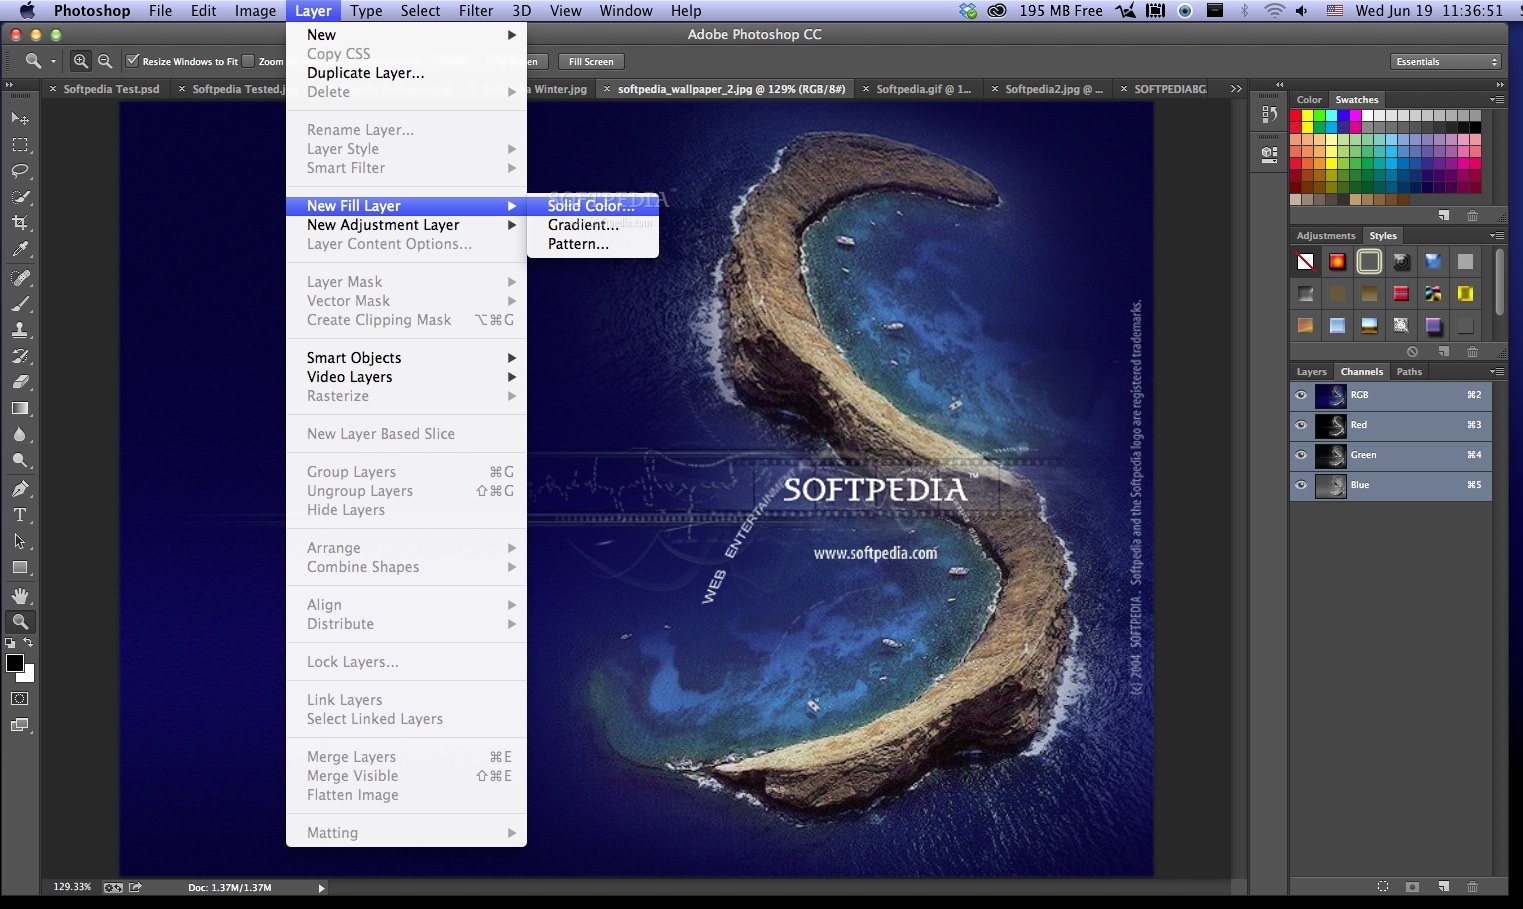 photoshop for mac free download full version cs6